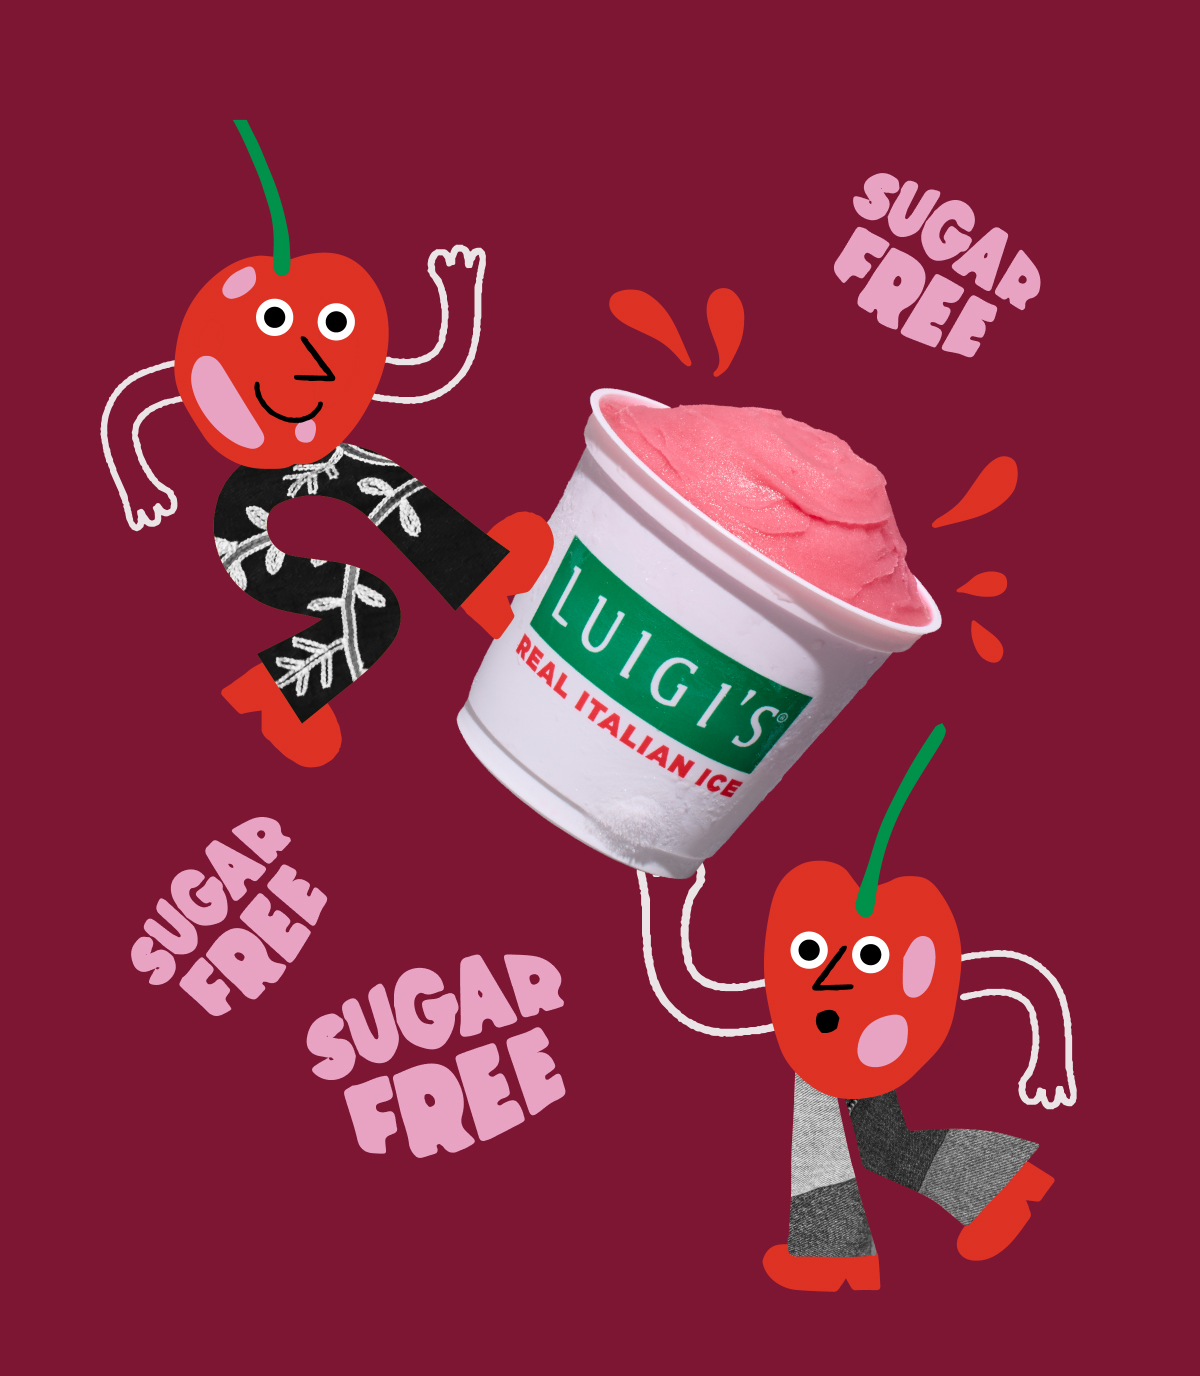 Graphic of two groovy cherry characters dancing with a cup of sugar-free cherry LUIGI'S Real Italian Ice. Background is a deep burgundy color. Sugar free is written three times in pink bubbly letters.